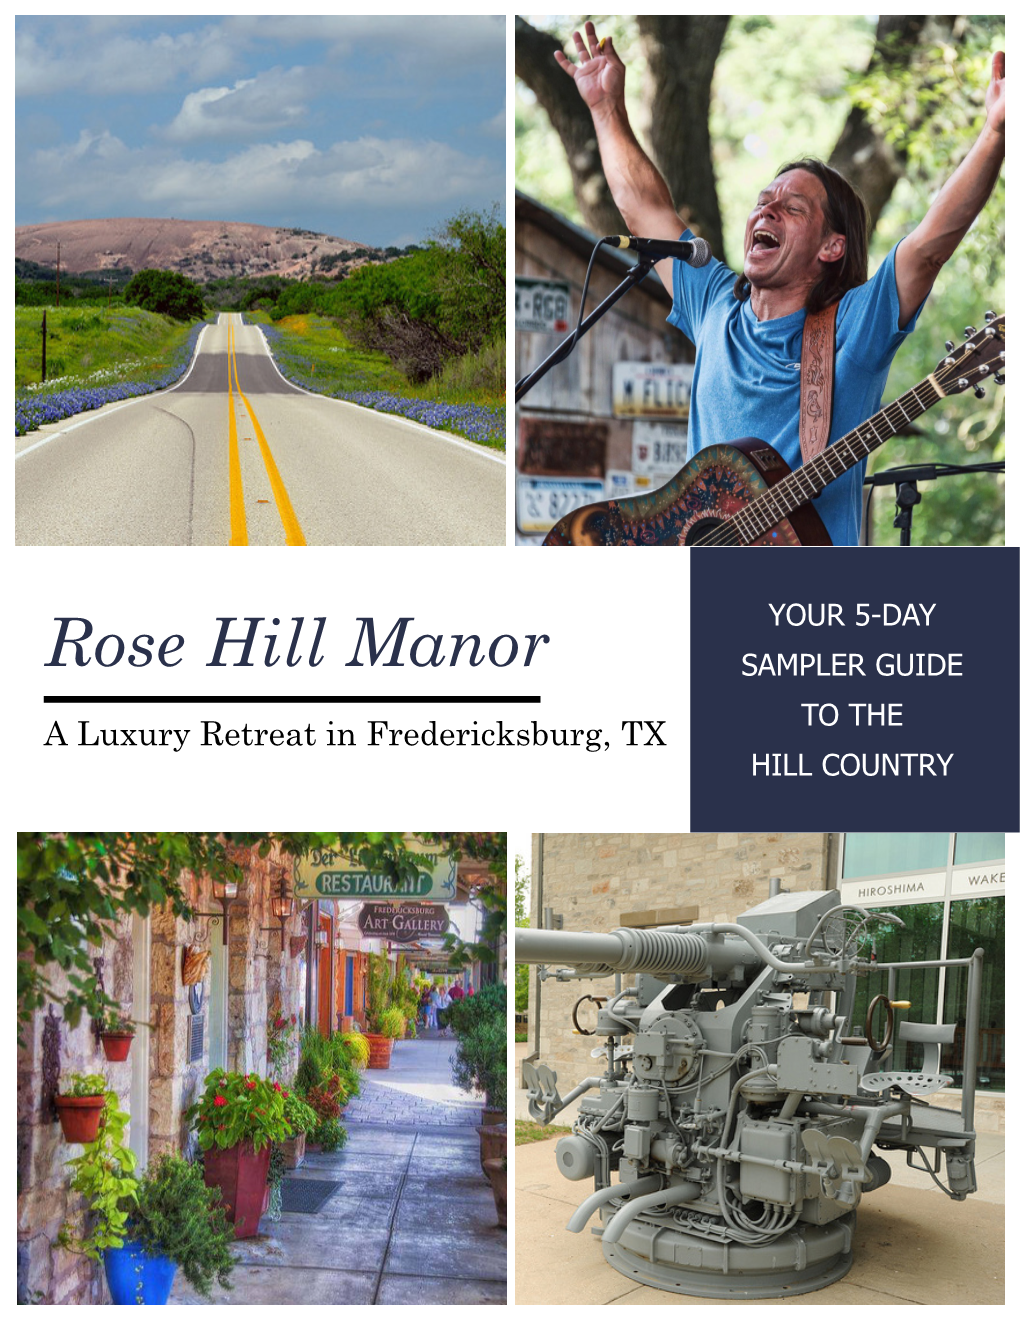 Rose Hill Manor SAMPLER GUIDE to the a Luxury Retreat in Fredericksburg, TX HILL COUNTRY the Hill Country 5-Day Vacation Sampler Travel Guide